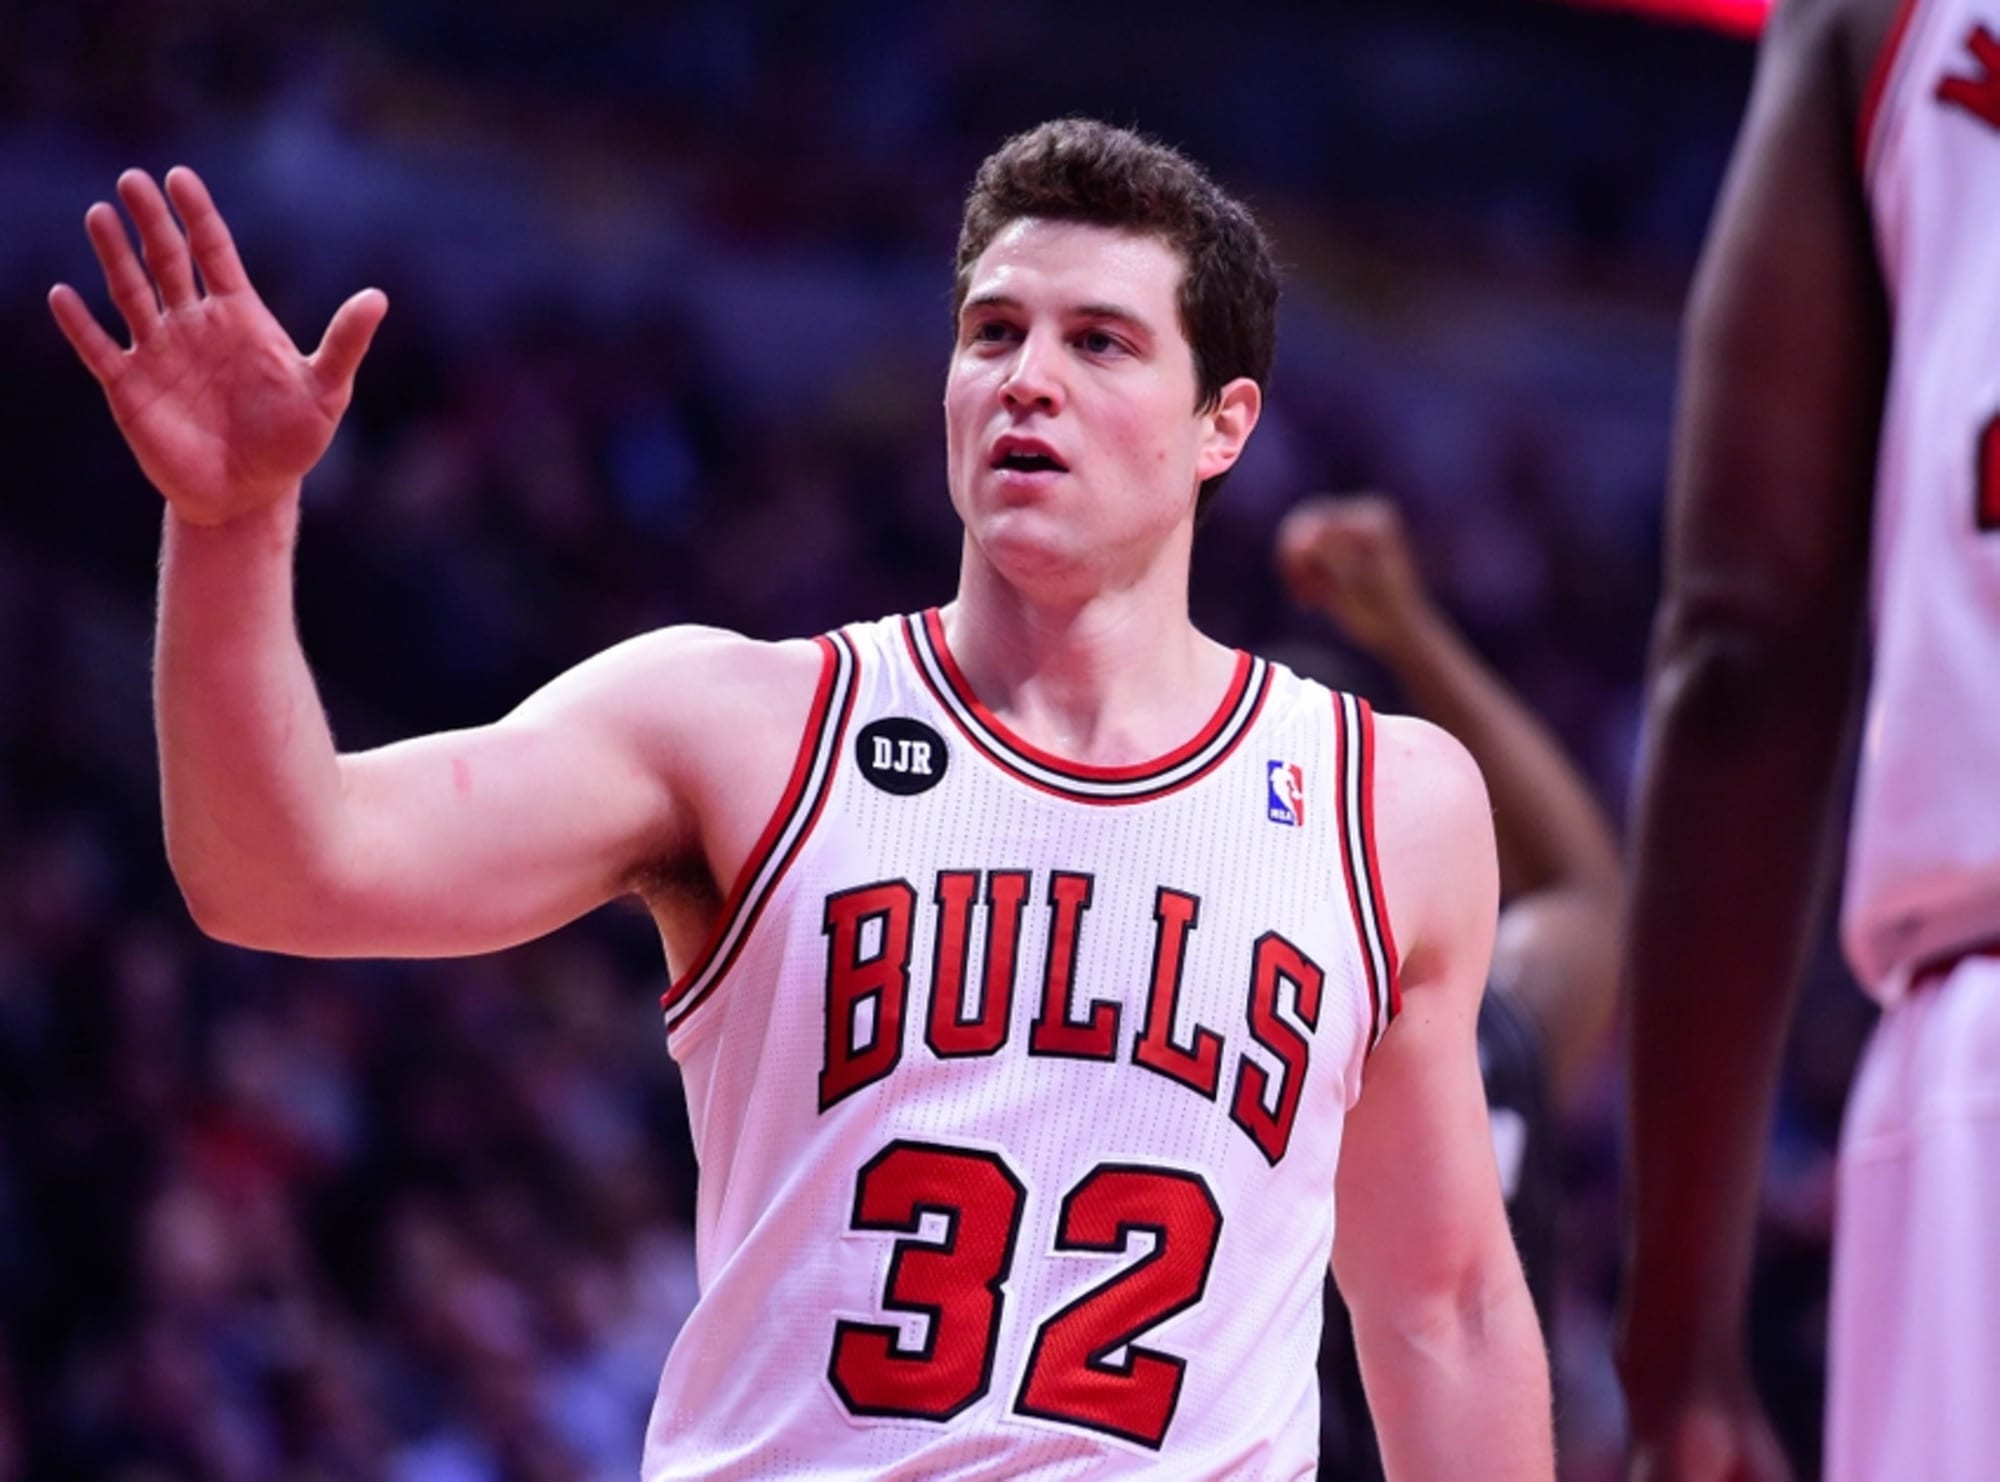 Can Jimmer Fredette bring some March Madness to the Phoenix Suns?